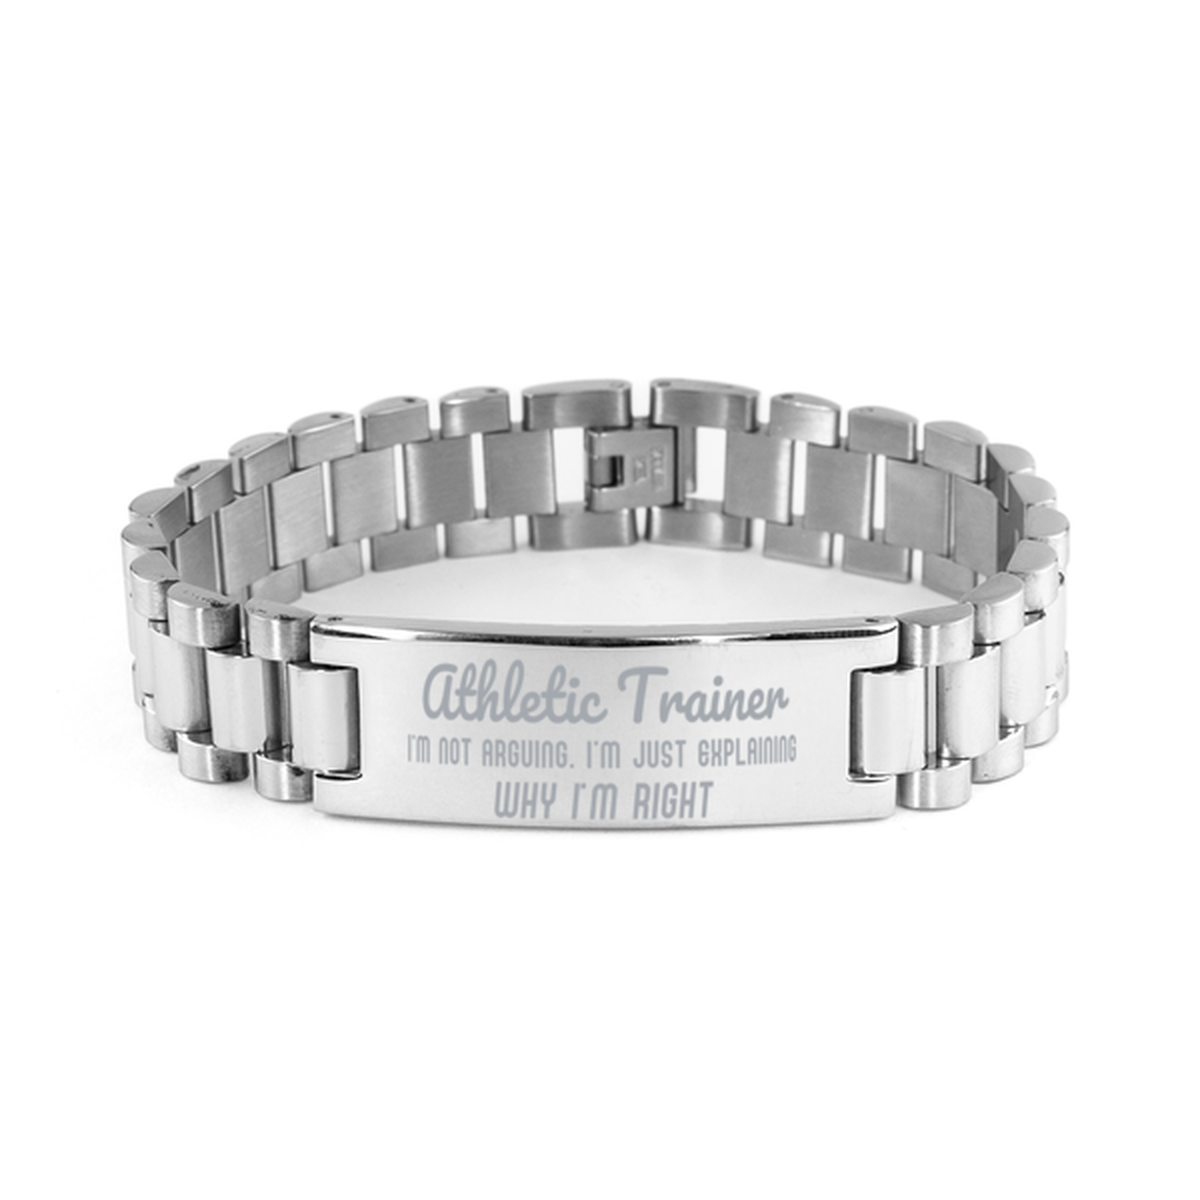 Athletic Trainer I'm not Arguing. I'm Just Explaining Why I'm RIGHT Ladder Stainless Steel Bracelet, Graduation Birthday Christmas Athletic Trainer Gifts For Athletic Trainer Funny Saying Quote Present for Men Women Coworker